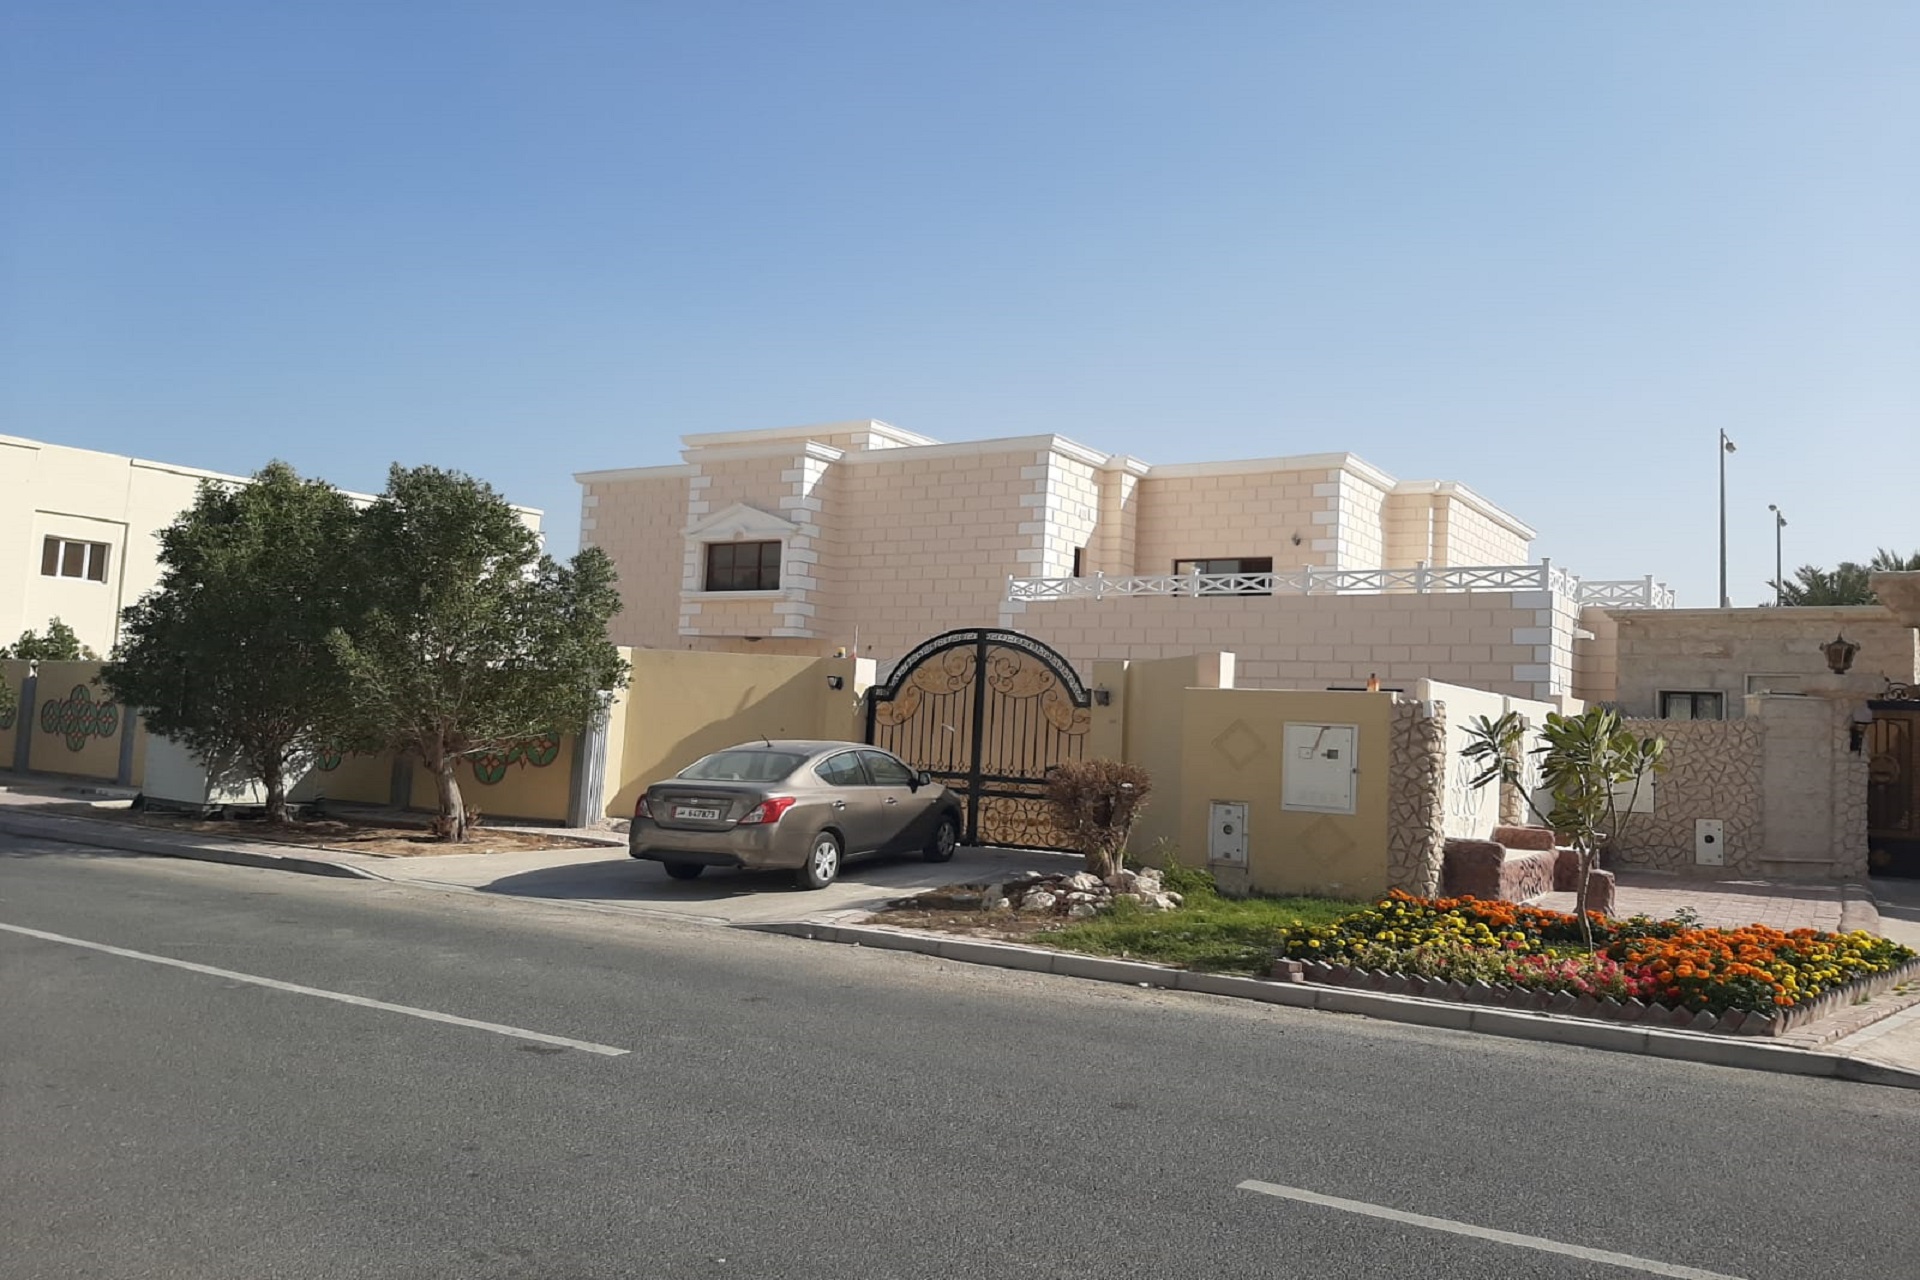 6 Bedrooms + Maid's quarters Stand alone villa in Westbay P-84